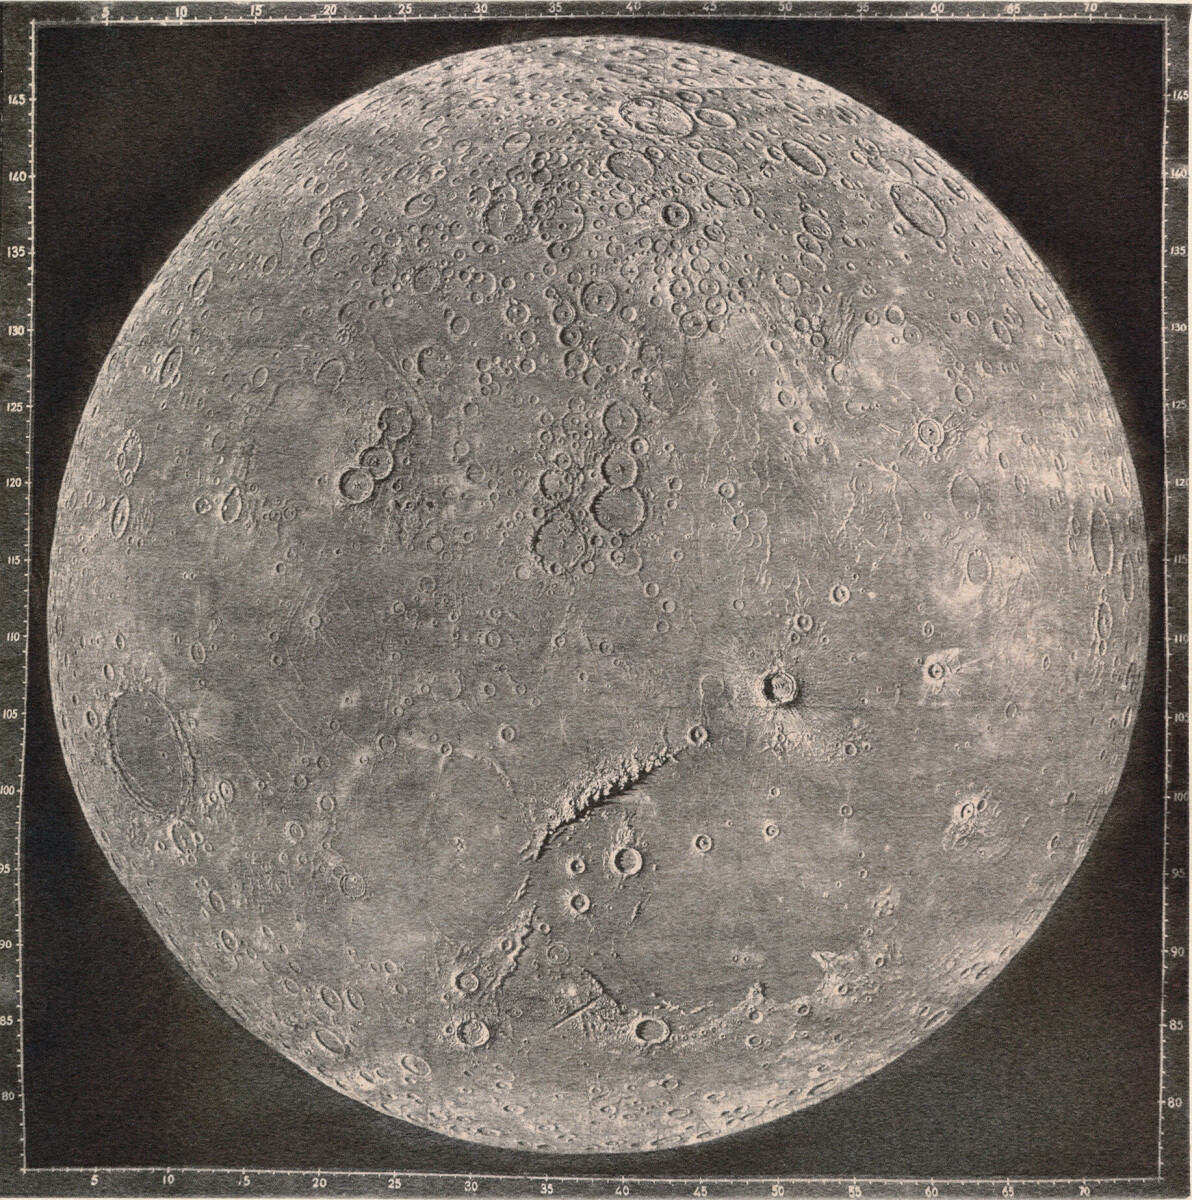 A map of the Moon